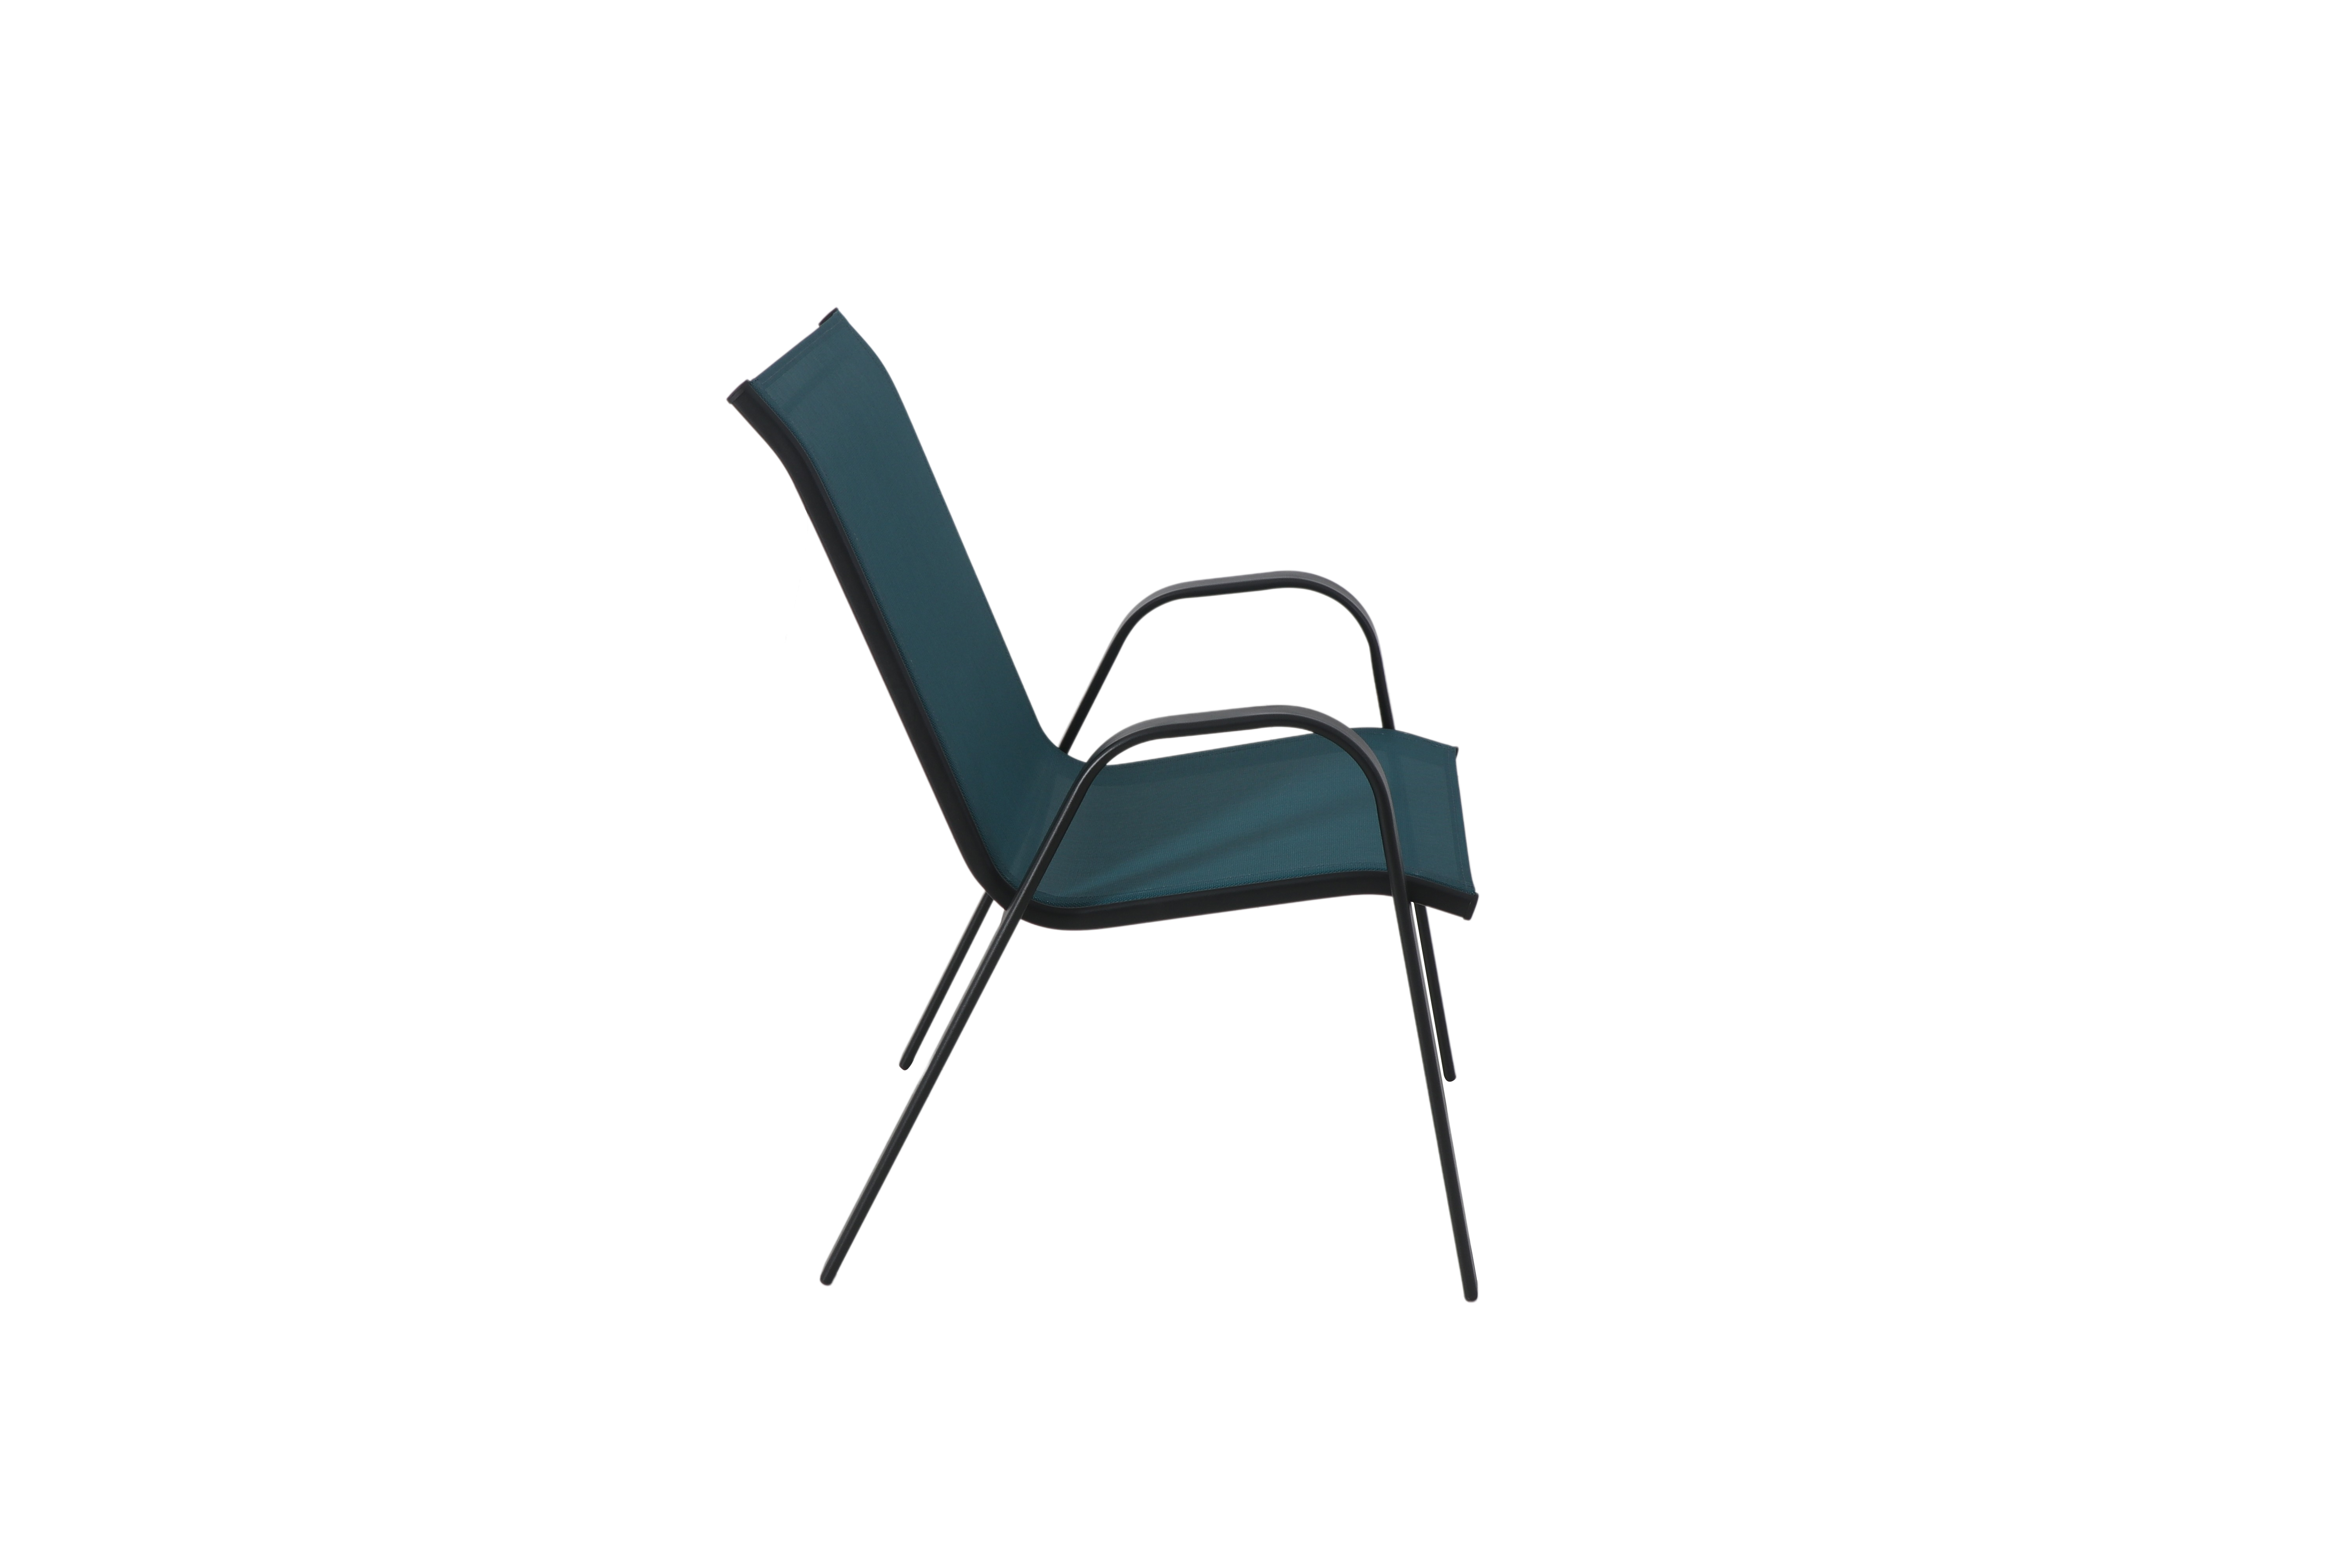 Mainstays Heritage Park Steel Stacking Chair, Teal - image 3 of 9